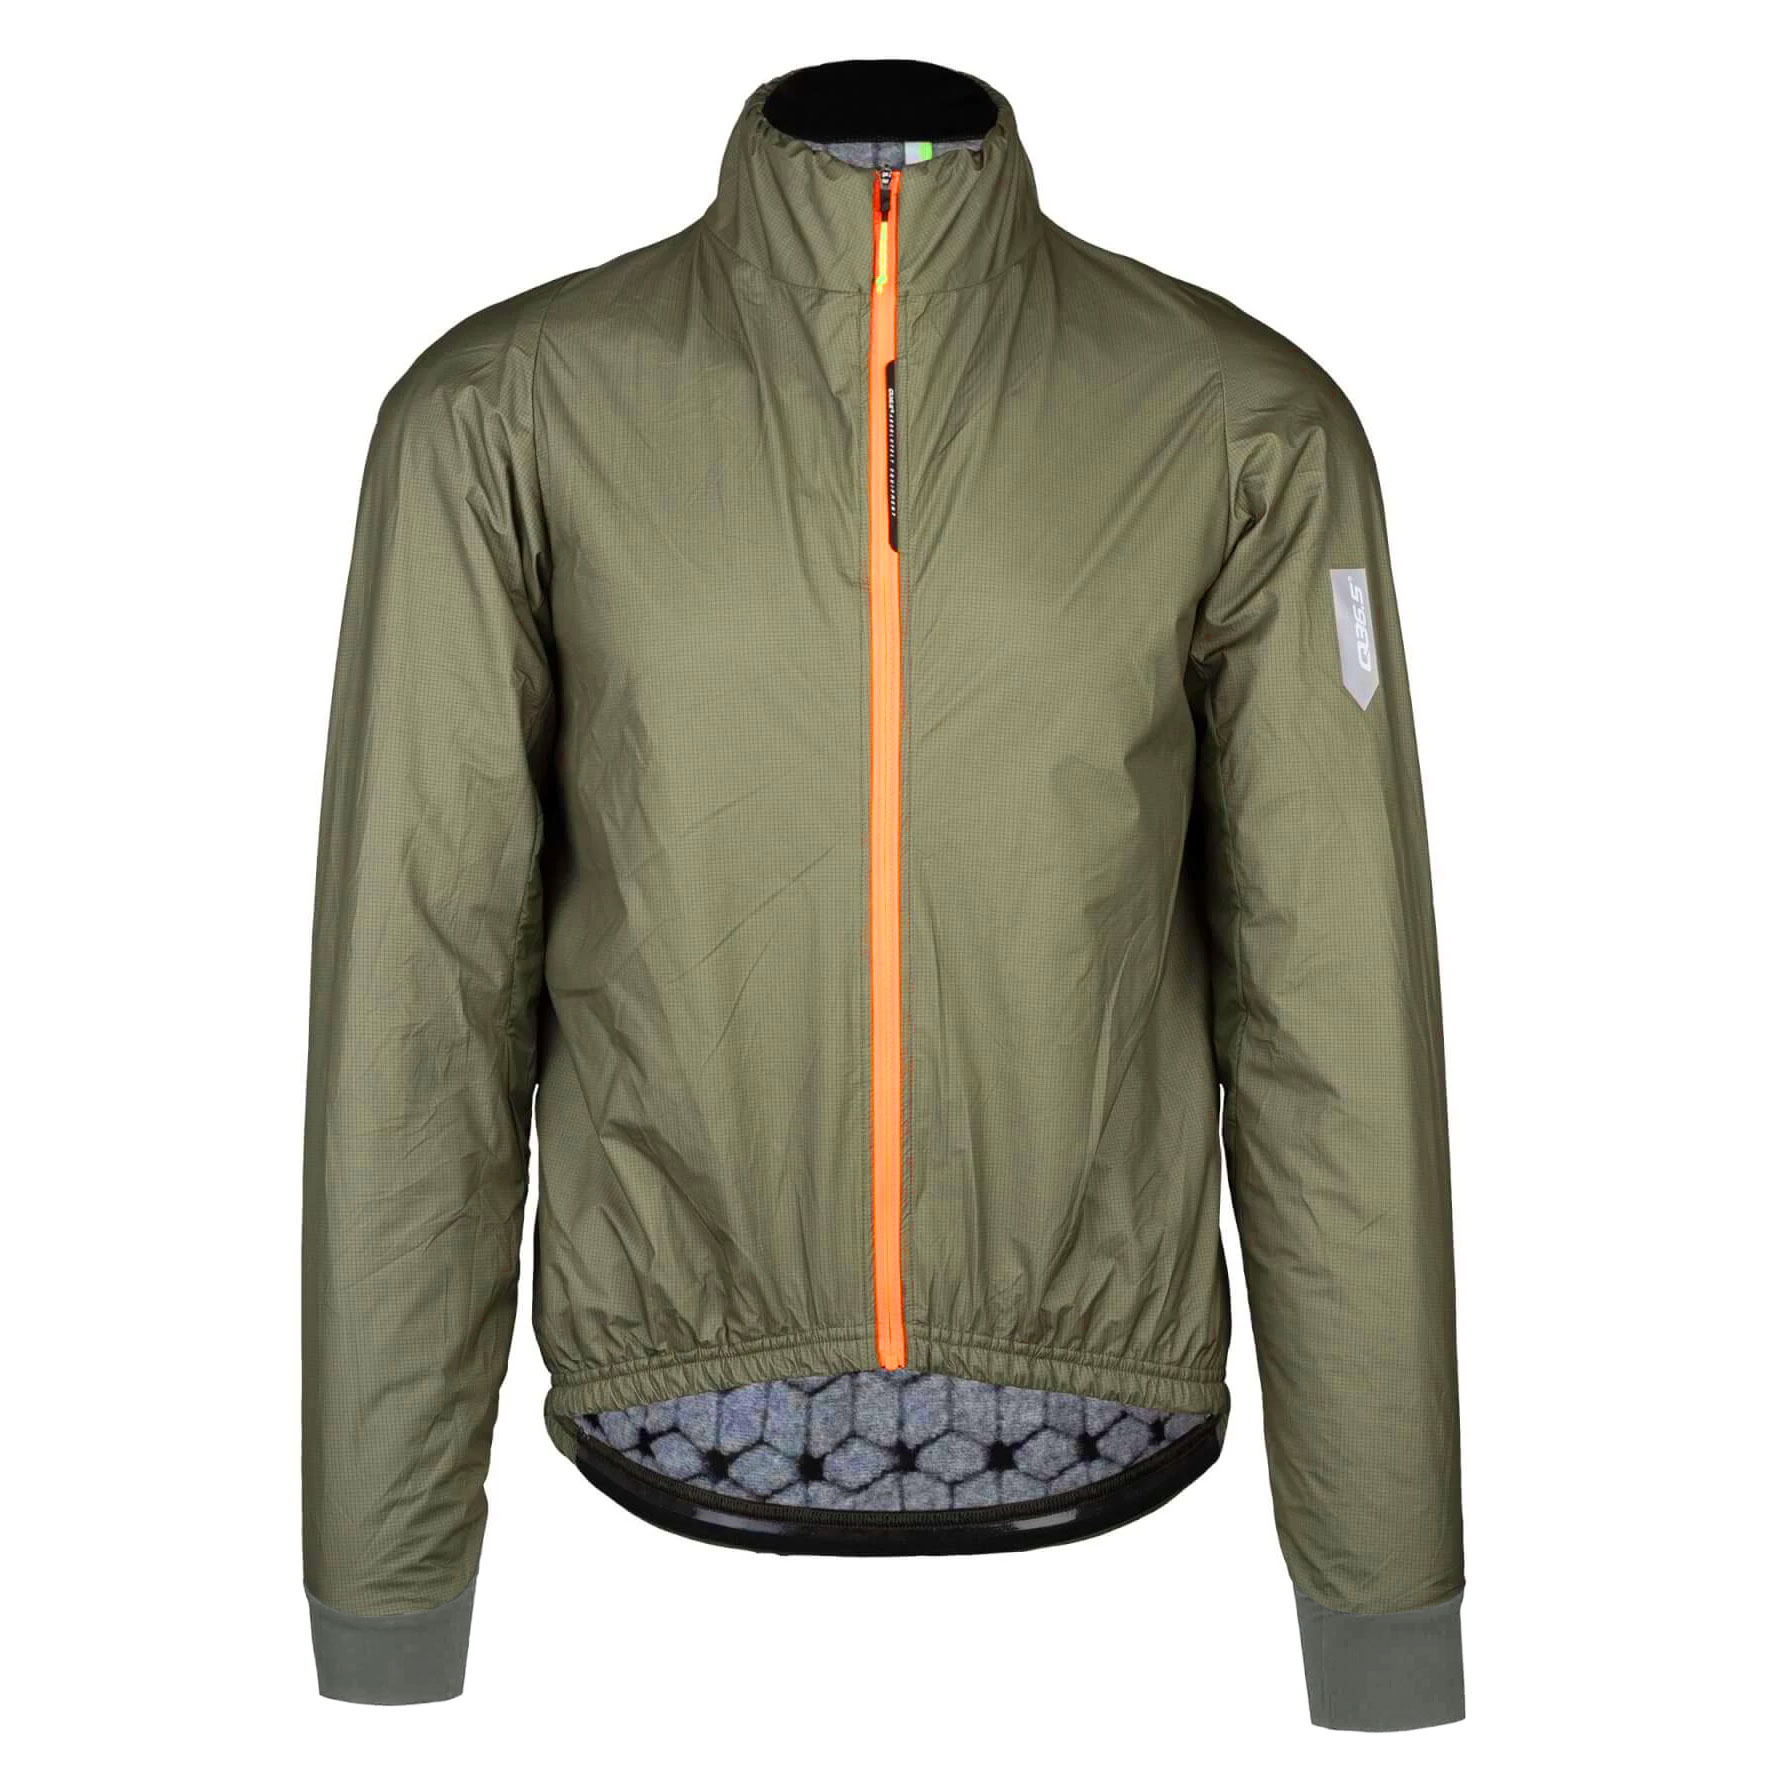 Image of Q36.5 Adventure Winter Jacket - olive green